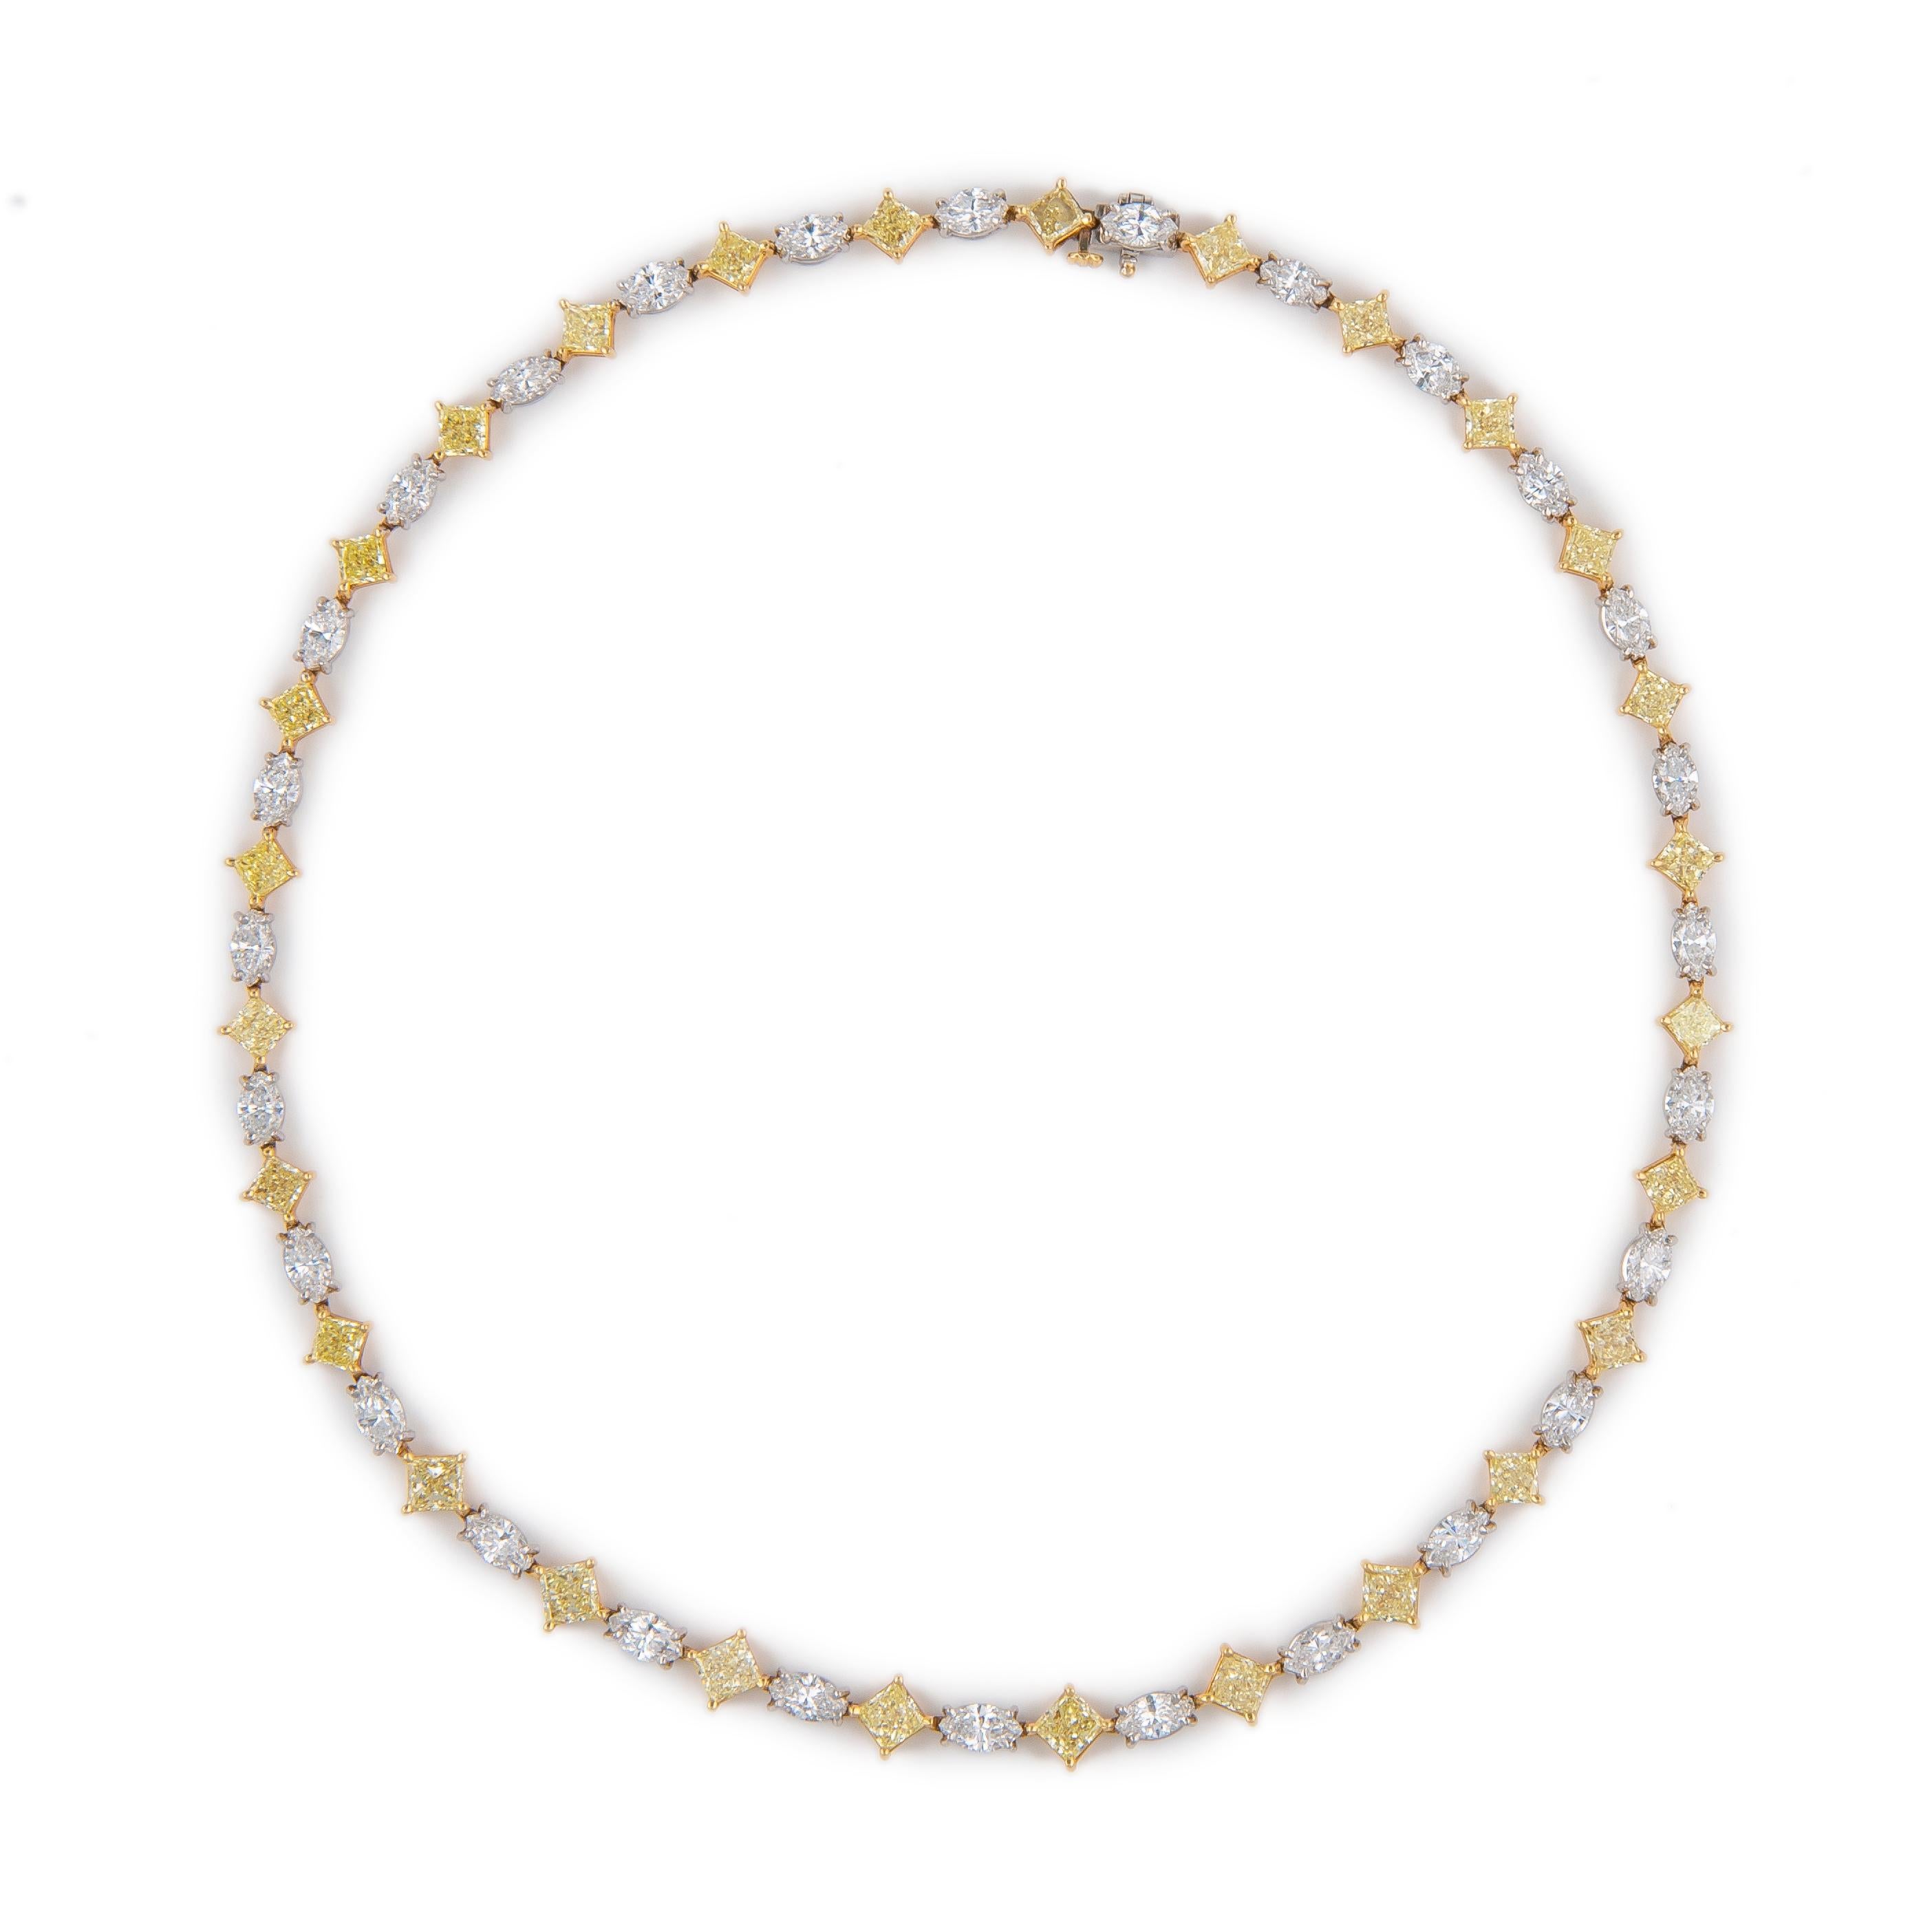 Contemporary Alexander 20.52 Yellow and White Diamond Tennis Necklace Platinum and 18k Gold